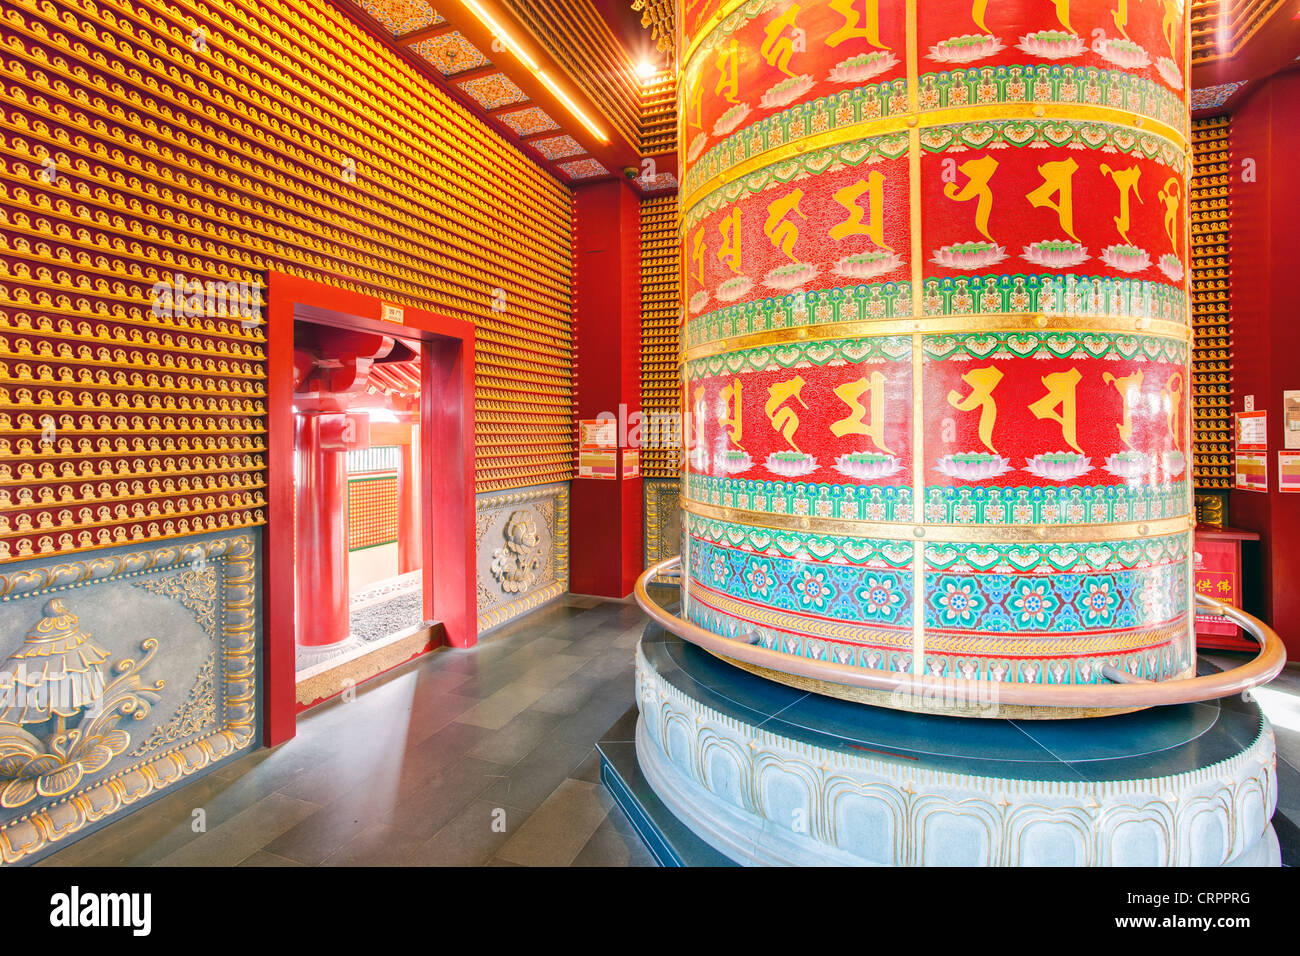 Prayer wheel inside the New Buddha Tooth Relic Temple and Museum on South Bridge road in Singapore, South East Asia Stock Photo